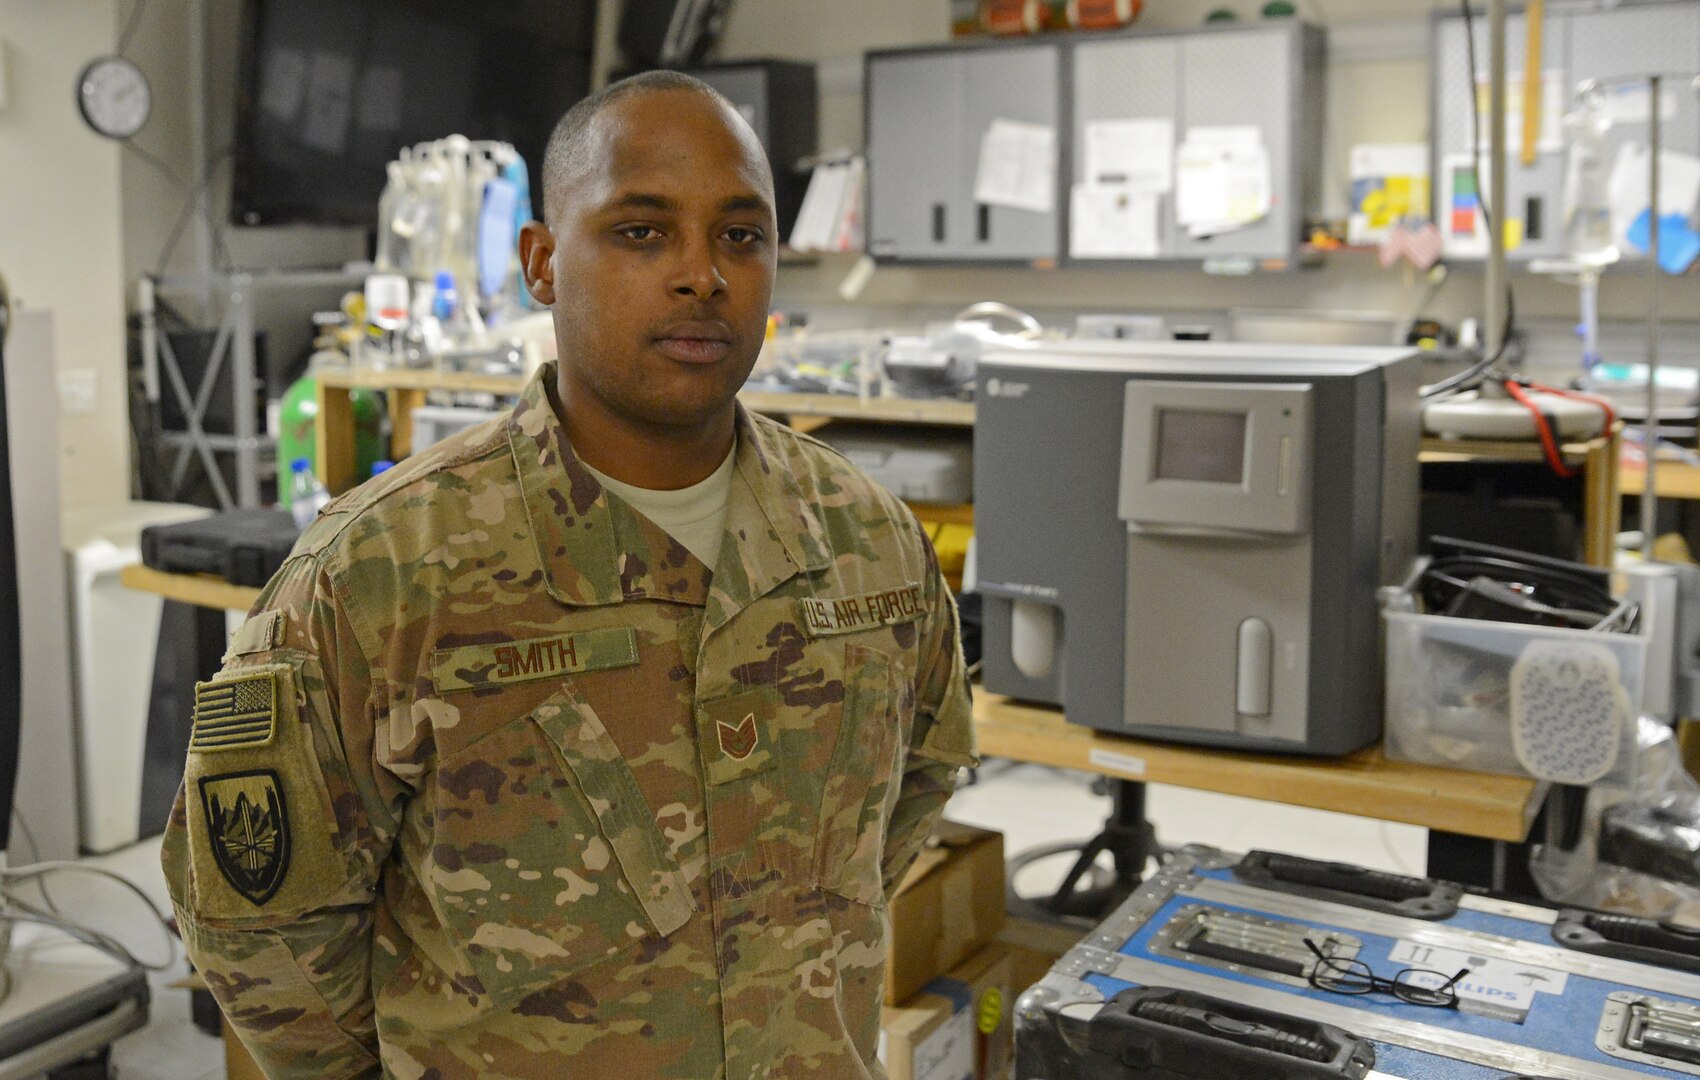 Tech. Sgt. Richard Smith, 455th Expeditionary Medical Operation Squadron clinical engineering NCOIC, poses for a photo Jan. 15, 2018 at Craig Joint Theater Hospital in Bagram Airfield, Afghanistan.